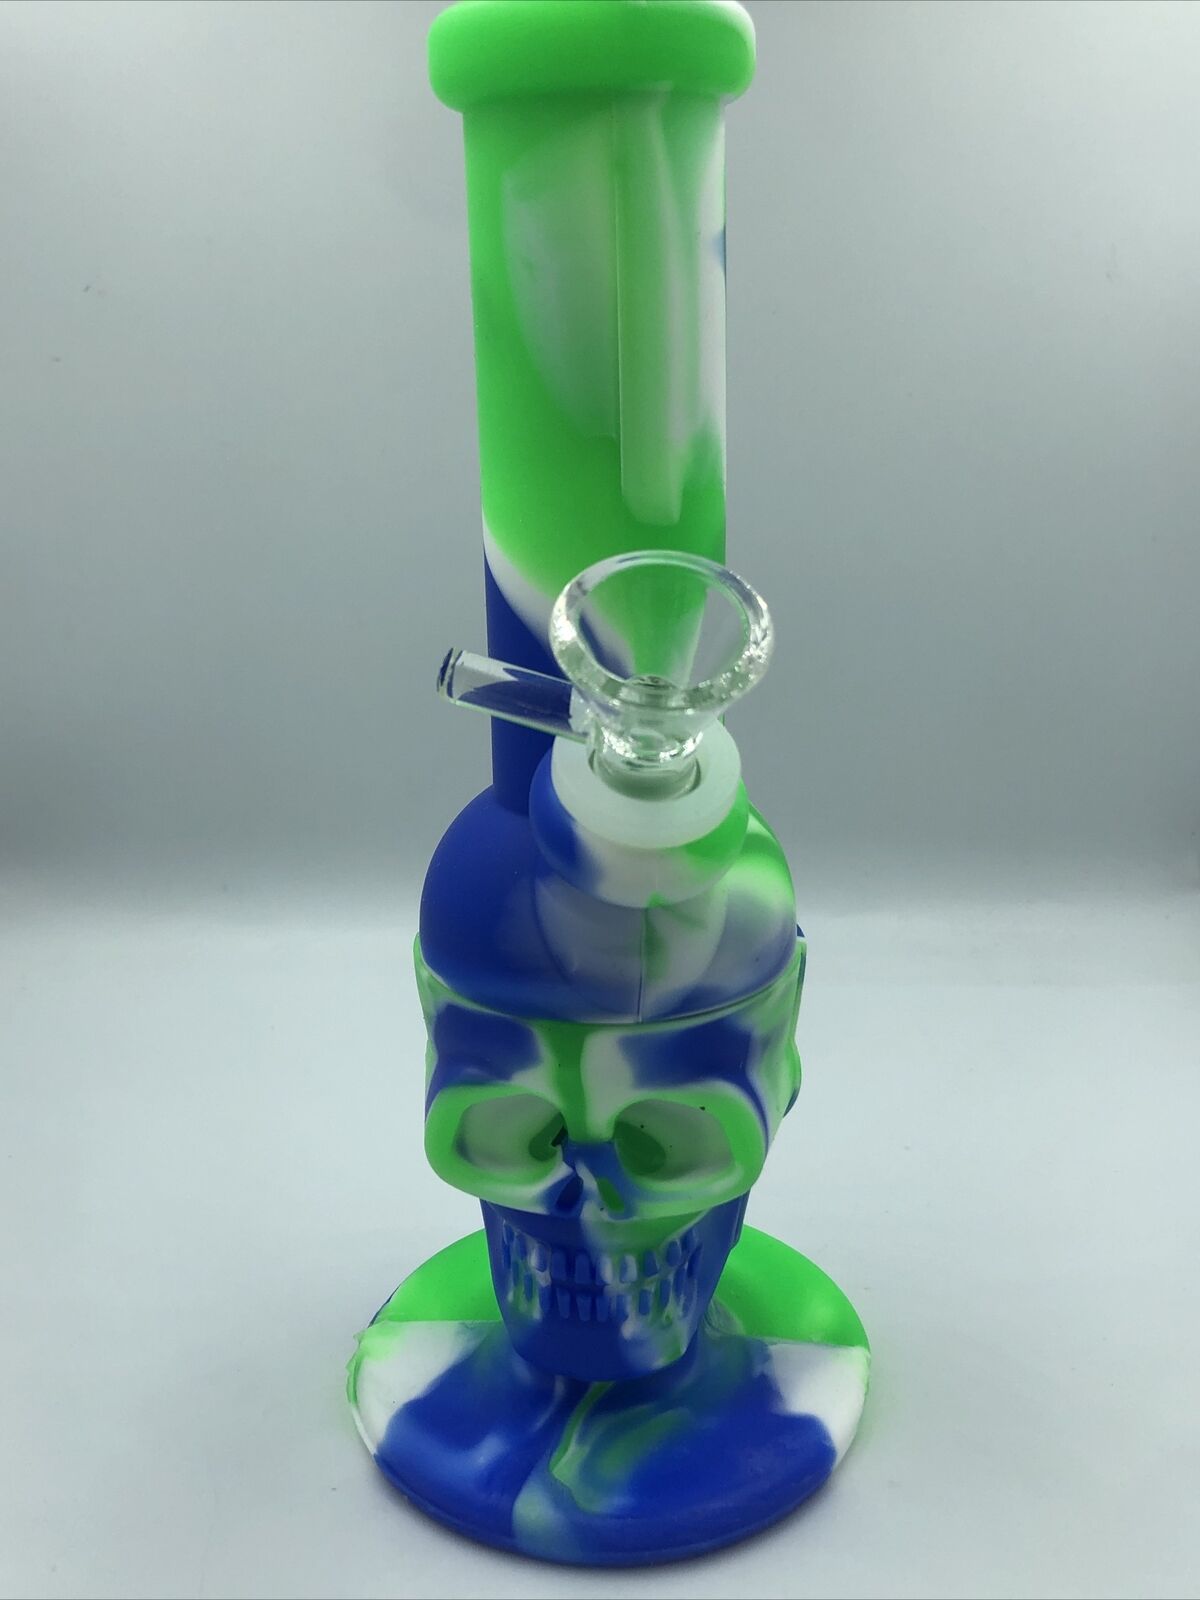 Unbreakable Silicone Skull Bong Detachable Water Pipe